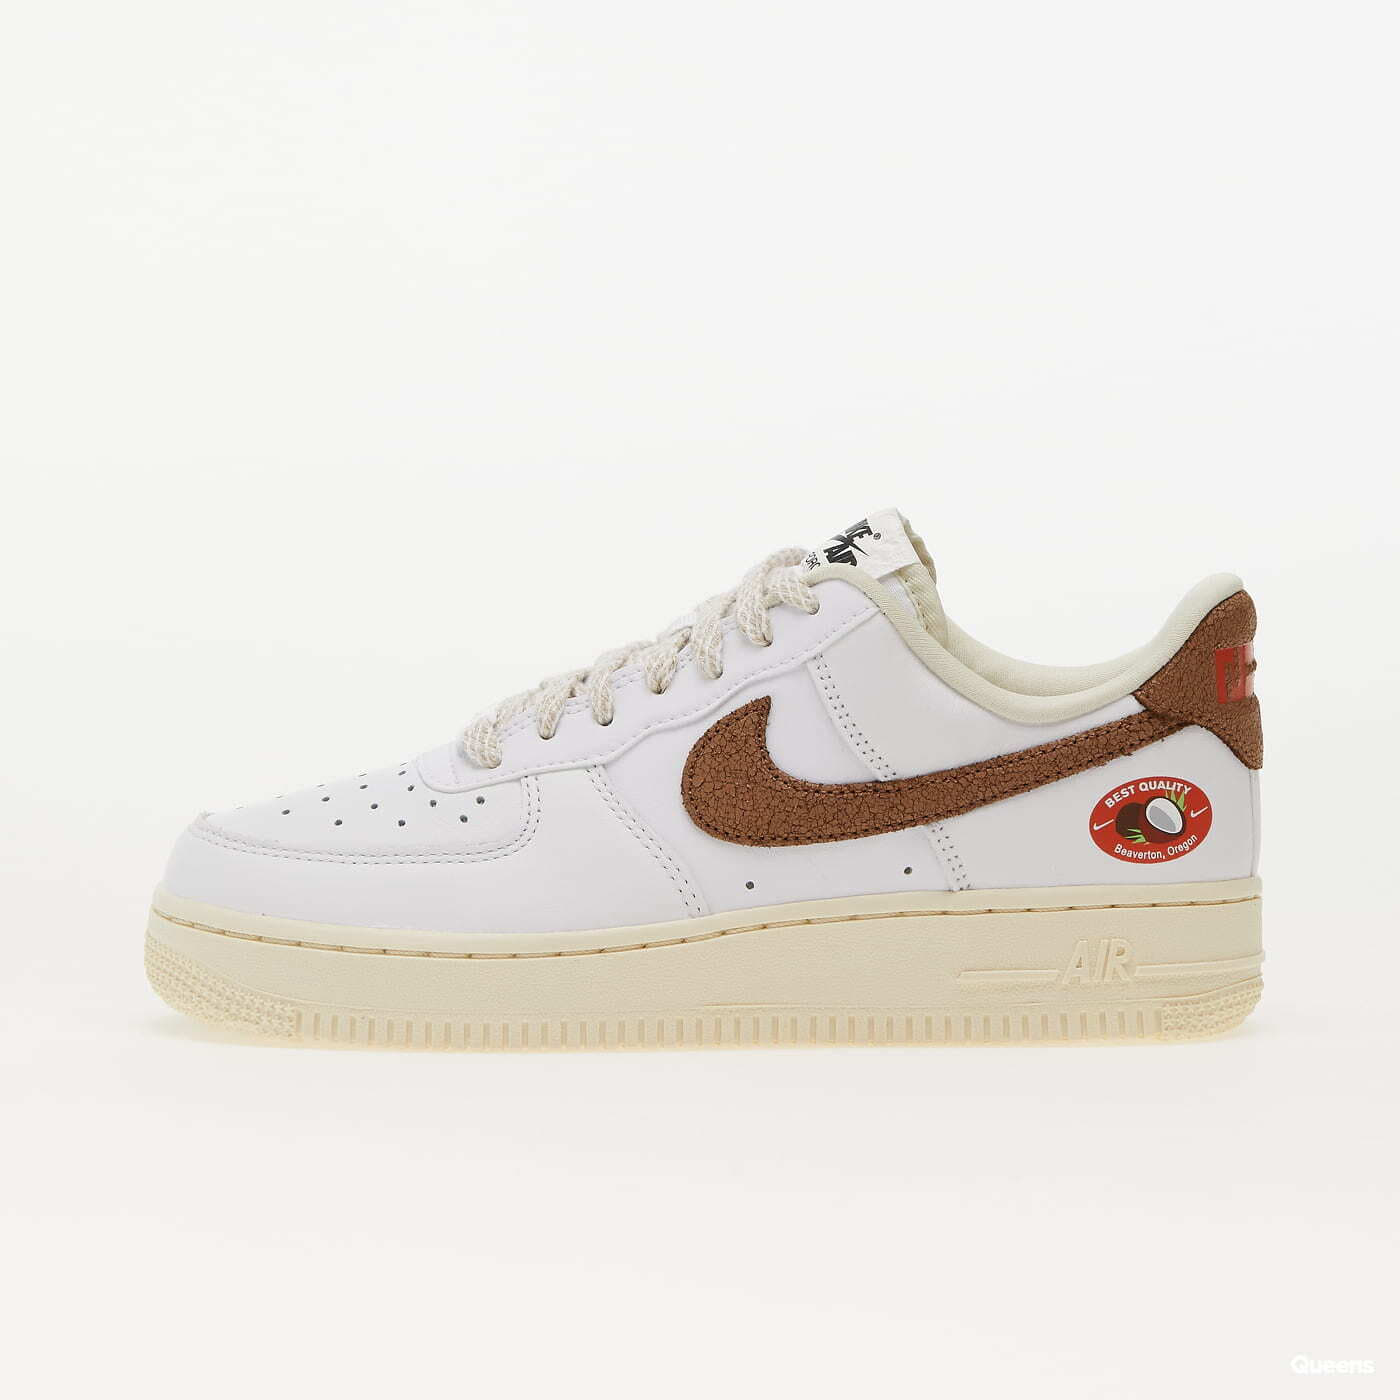 Damskie buty Nike WMNS Air Force 1 ´07 LX White/ Archaeo Brown-Coconut Milk